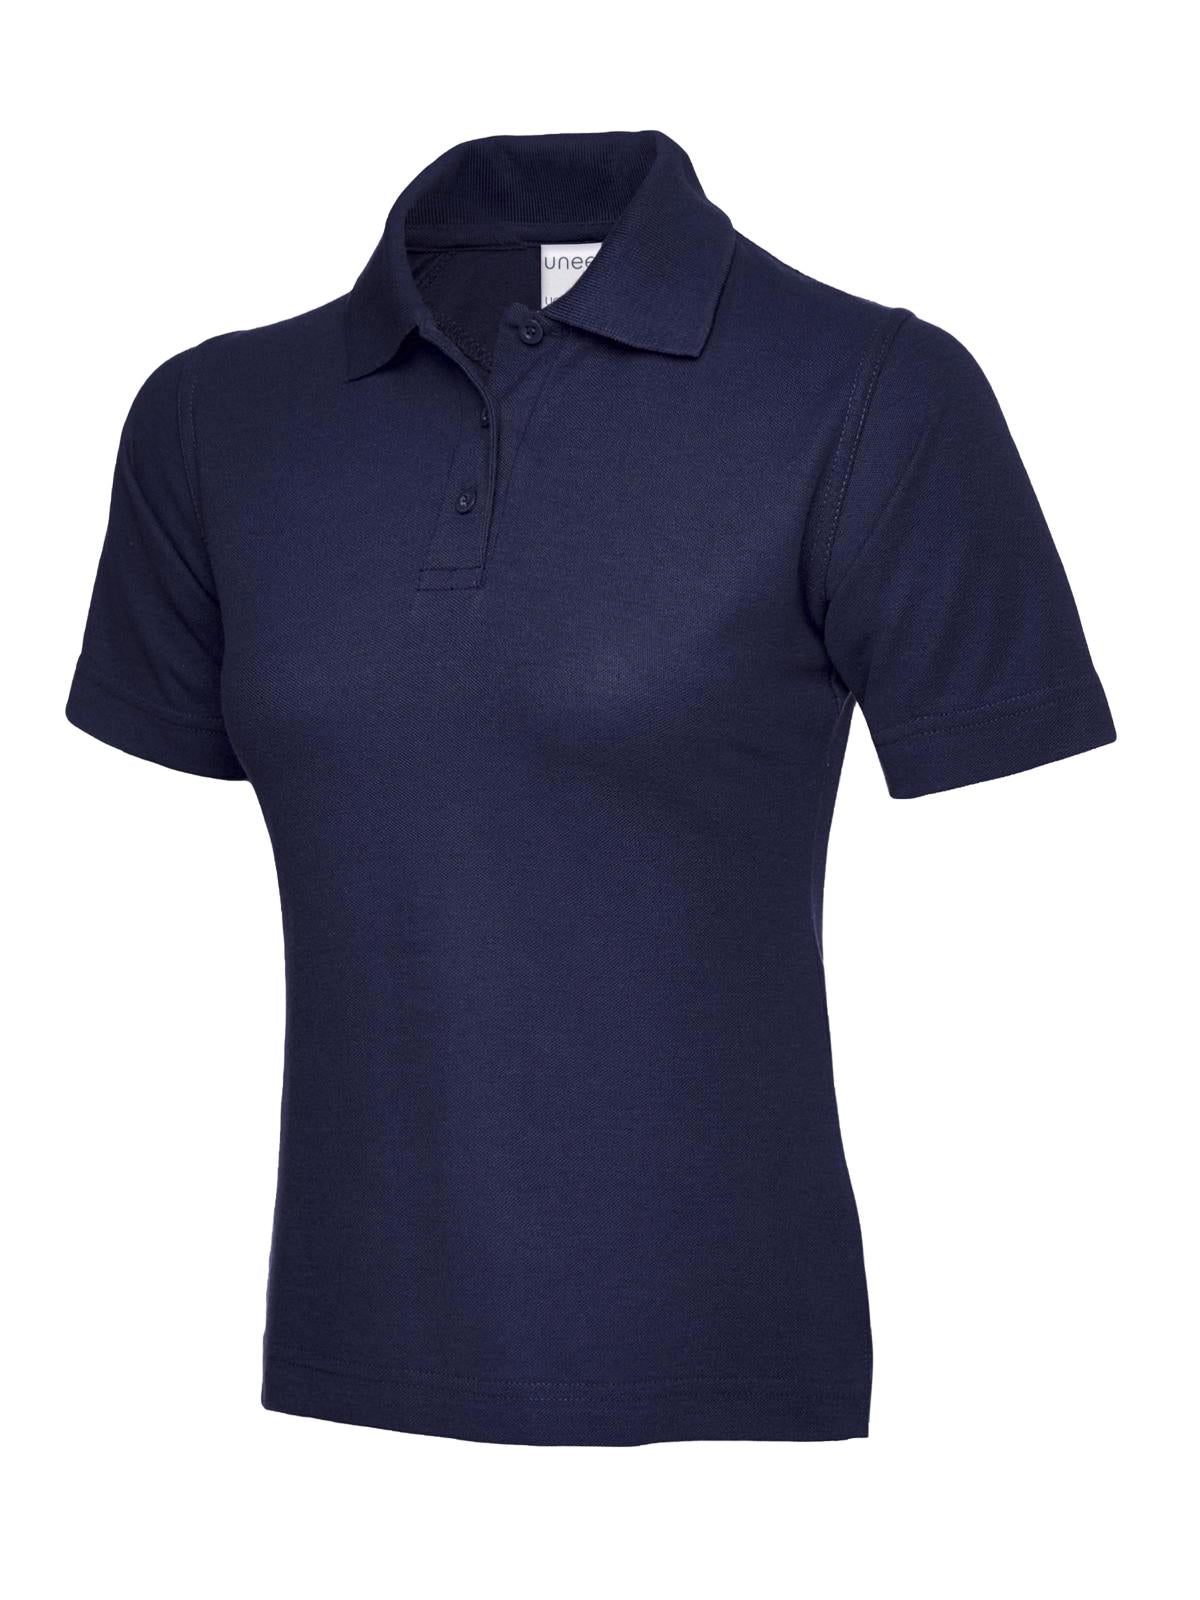 ladies_ultra_cotton_polo_shirt_french_navy